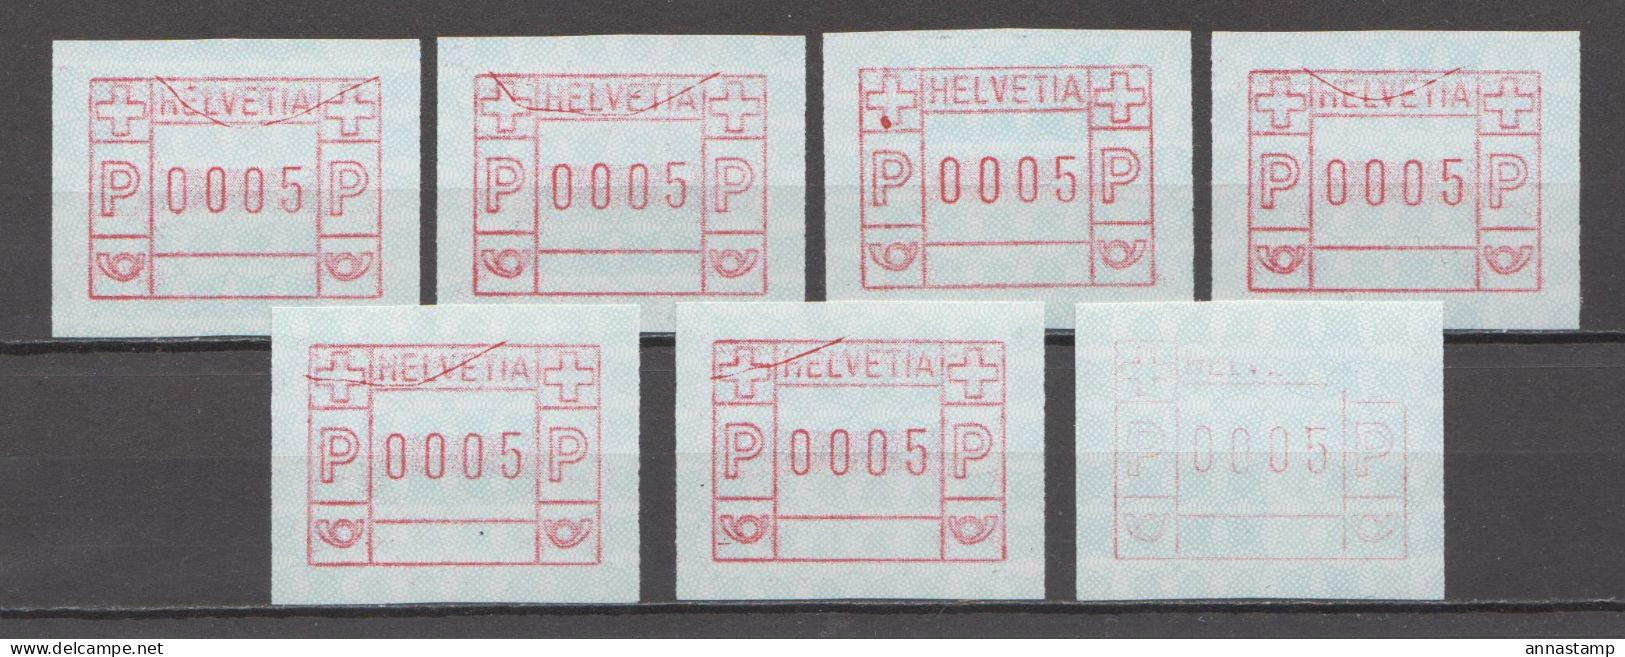 Switzerland 7 MNH Error Stamps - Automatic Stamps